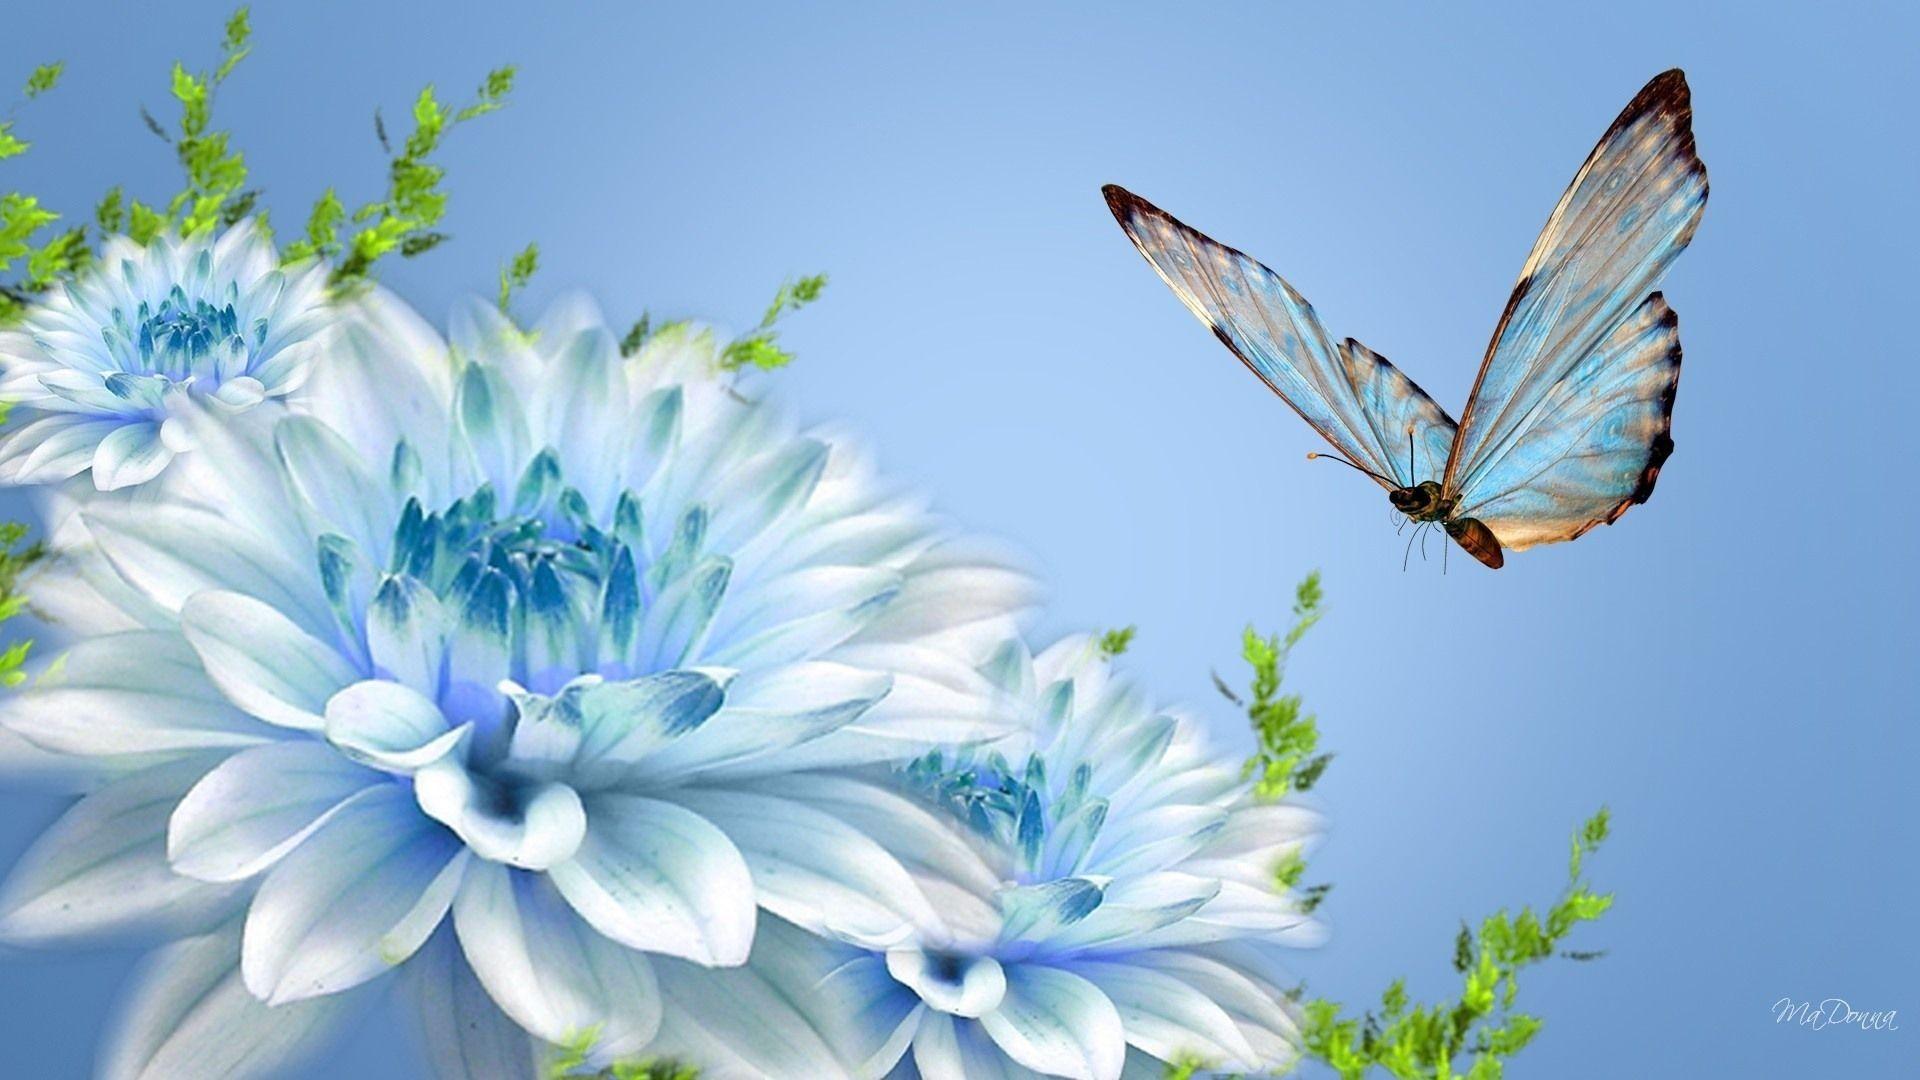 Flower and Butterfly Wallpaper